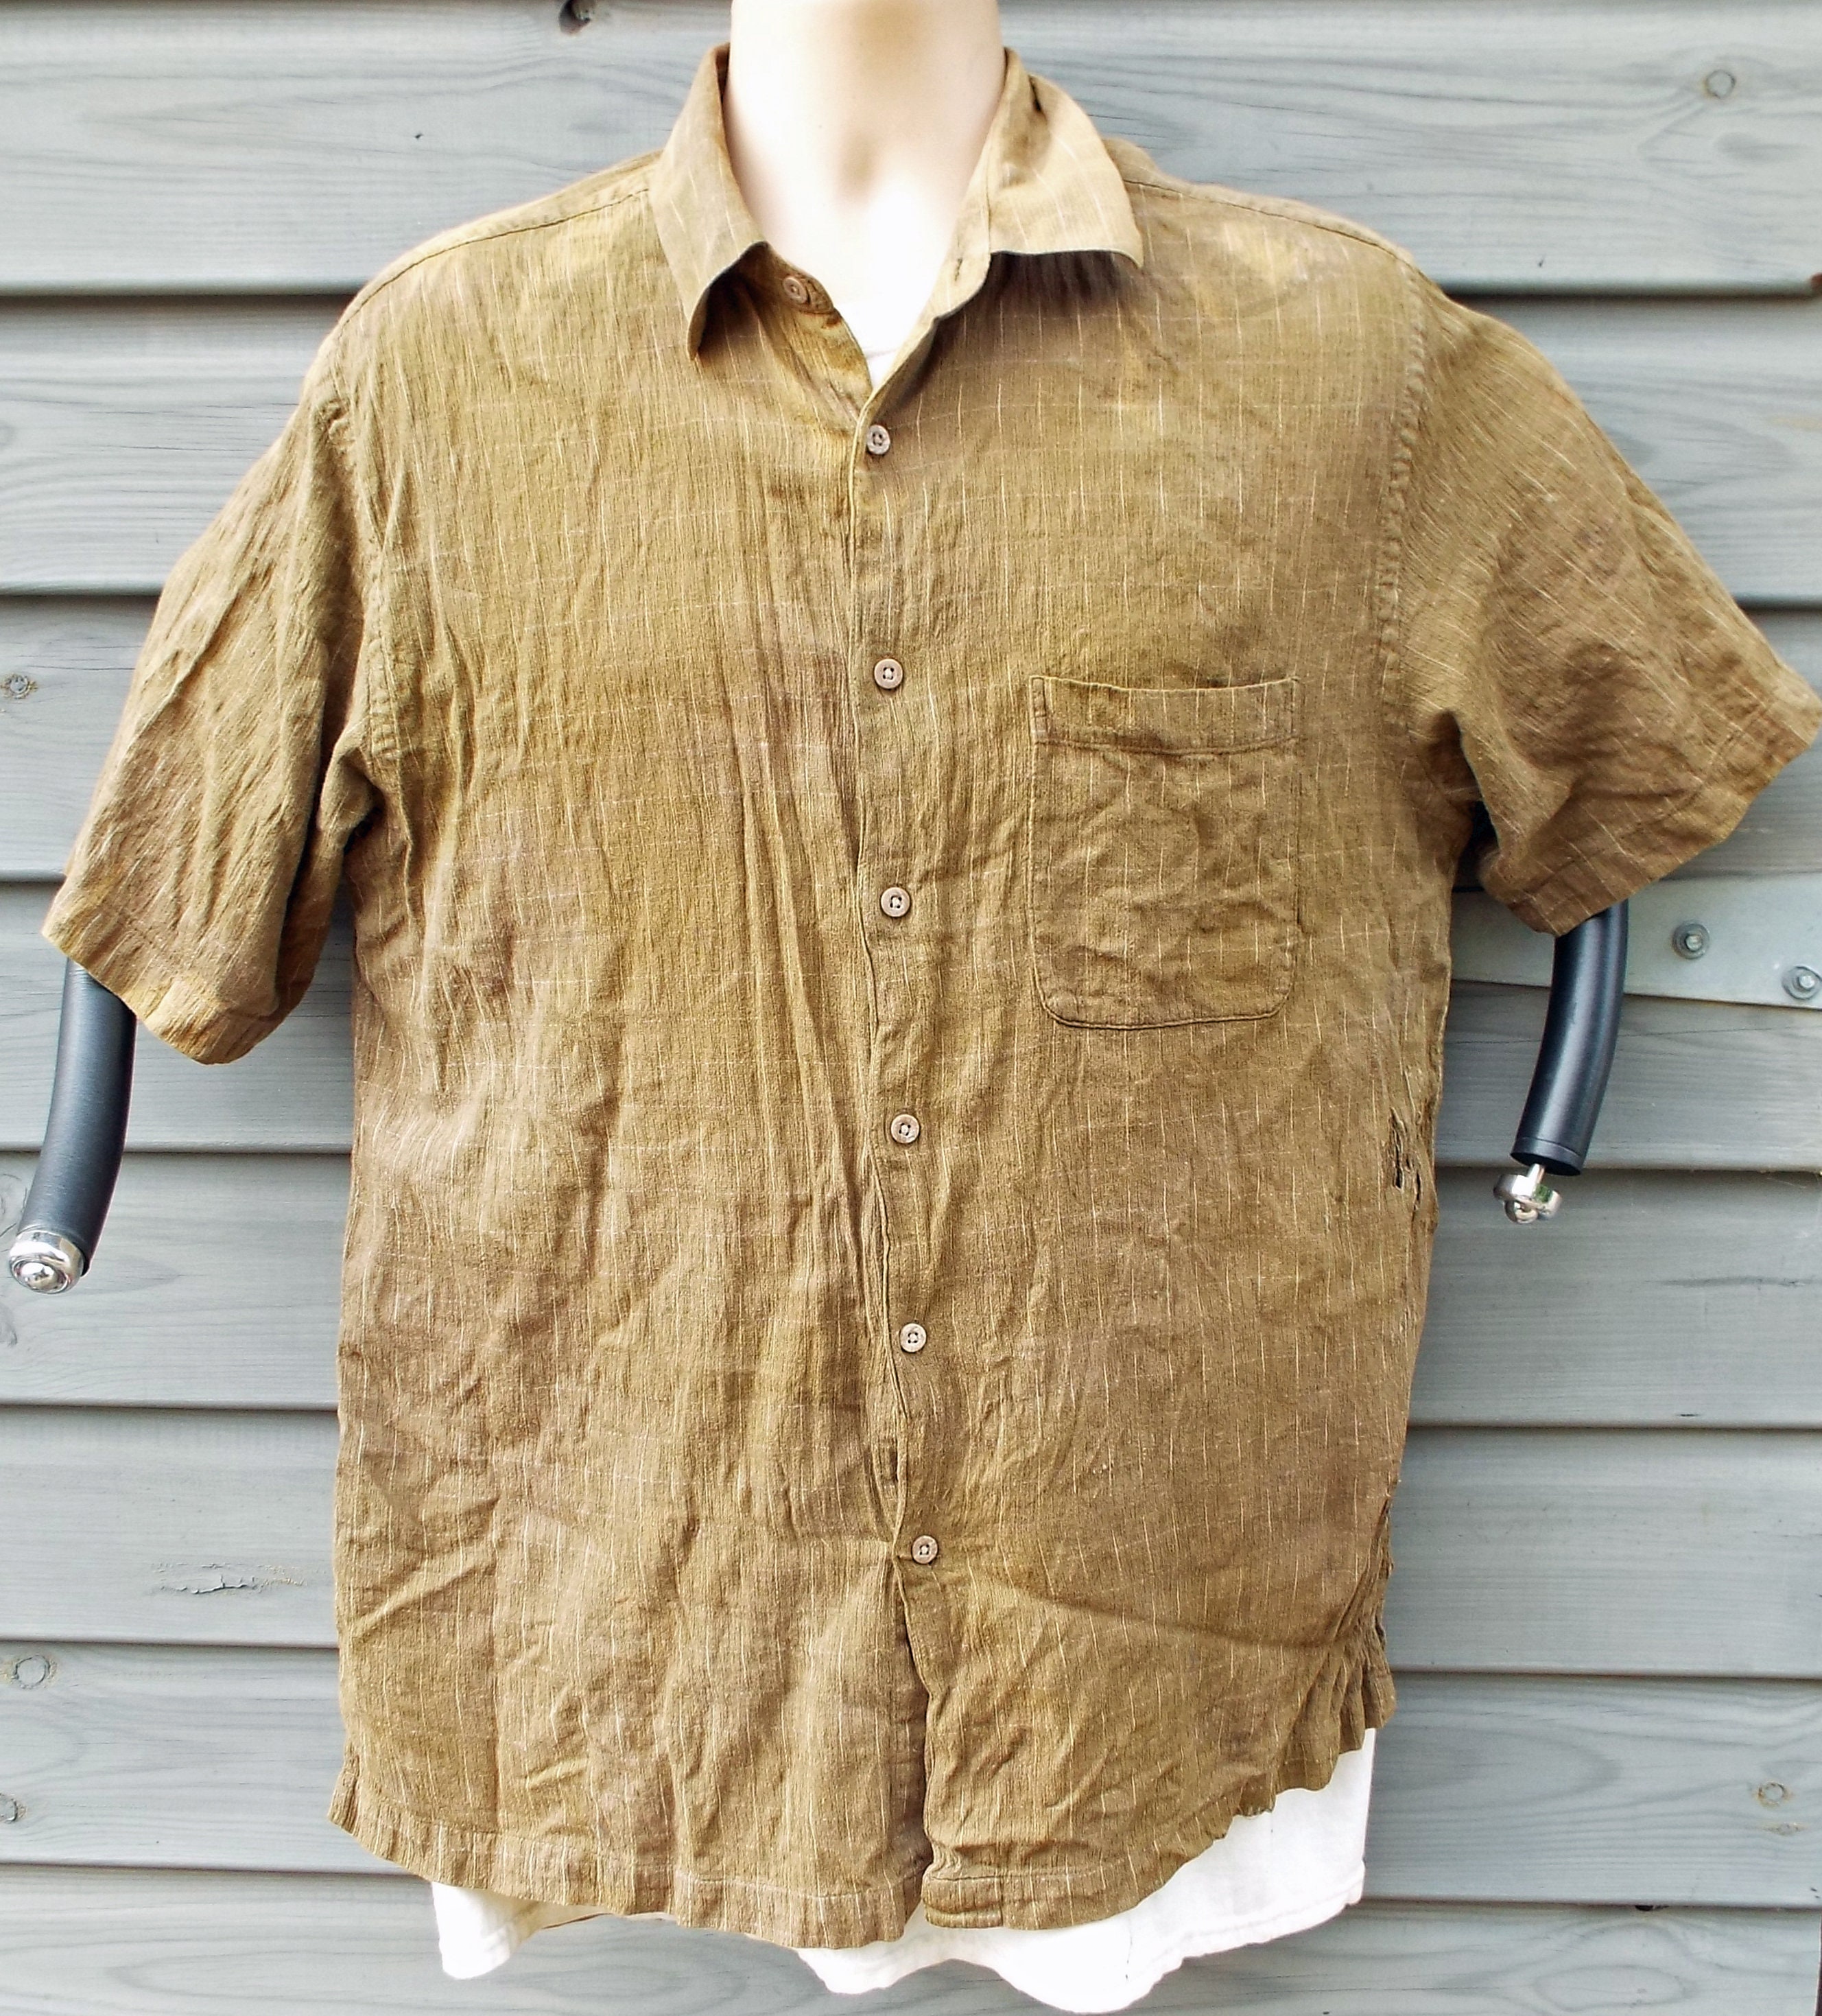 Discover Distressed Zombie Shirt Large